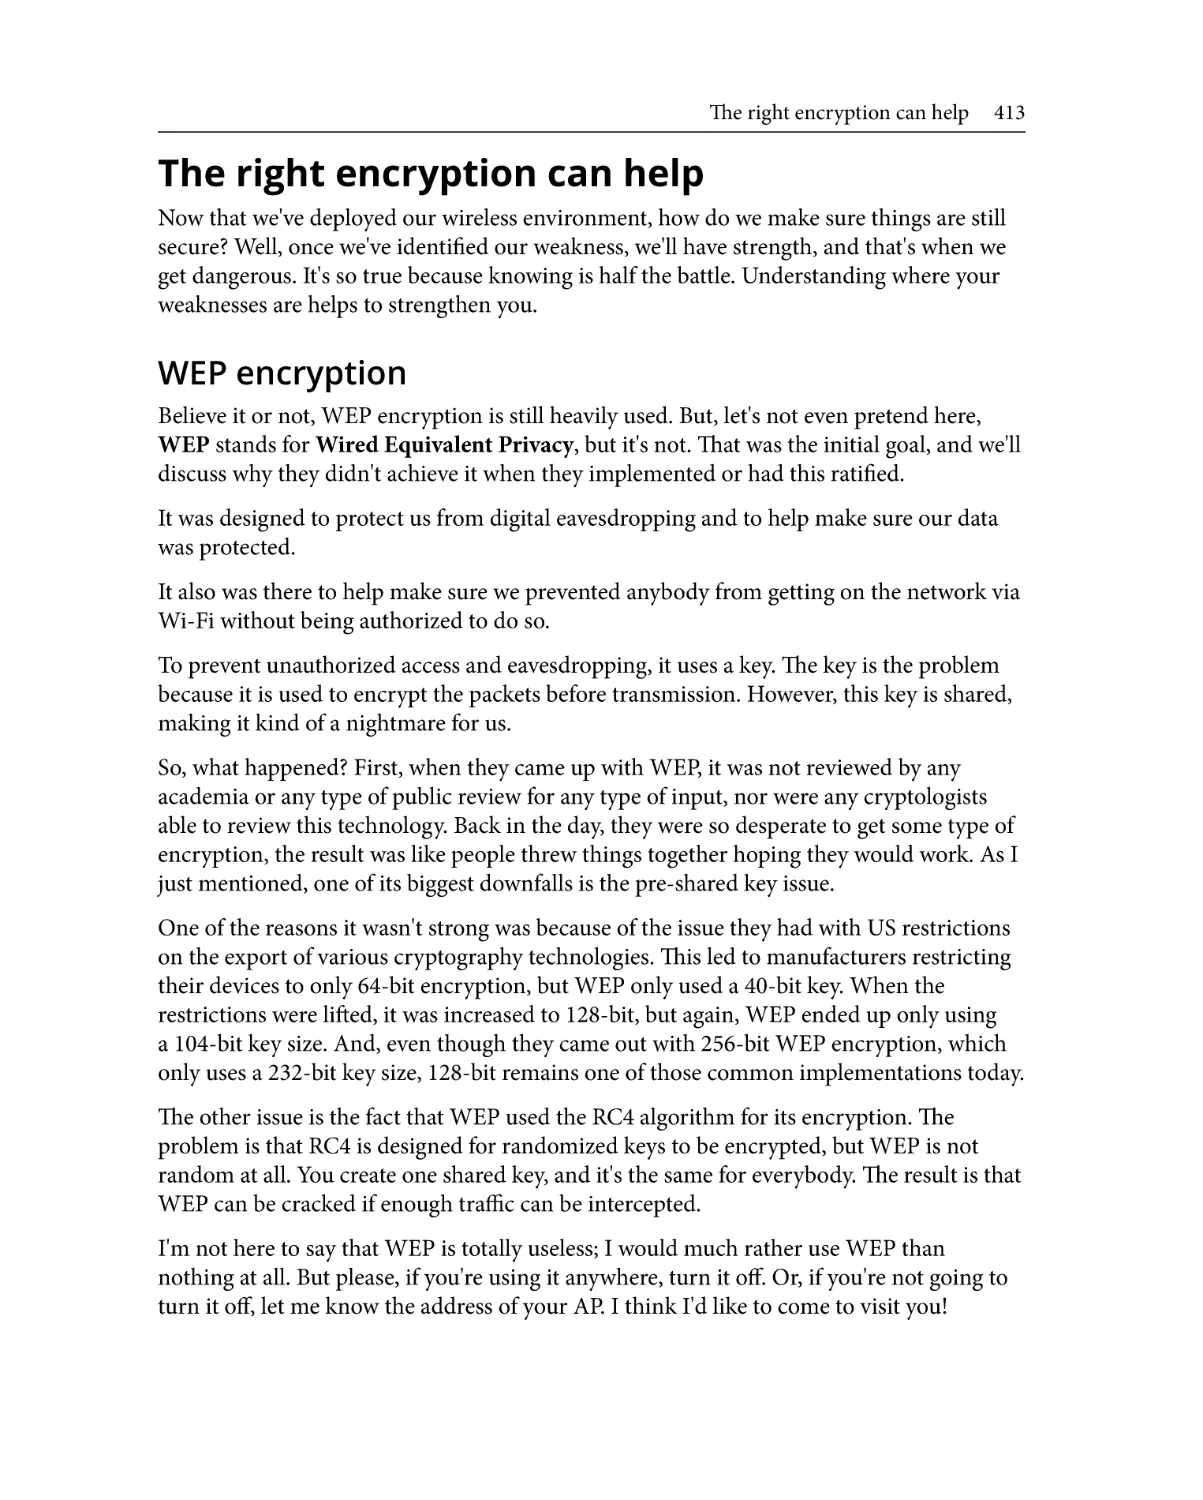 The right encryption can help
WEP encryption